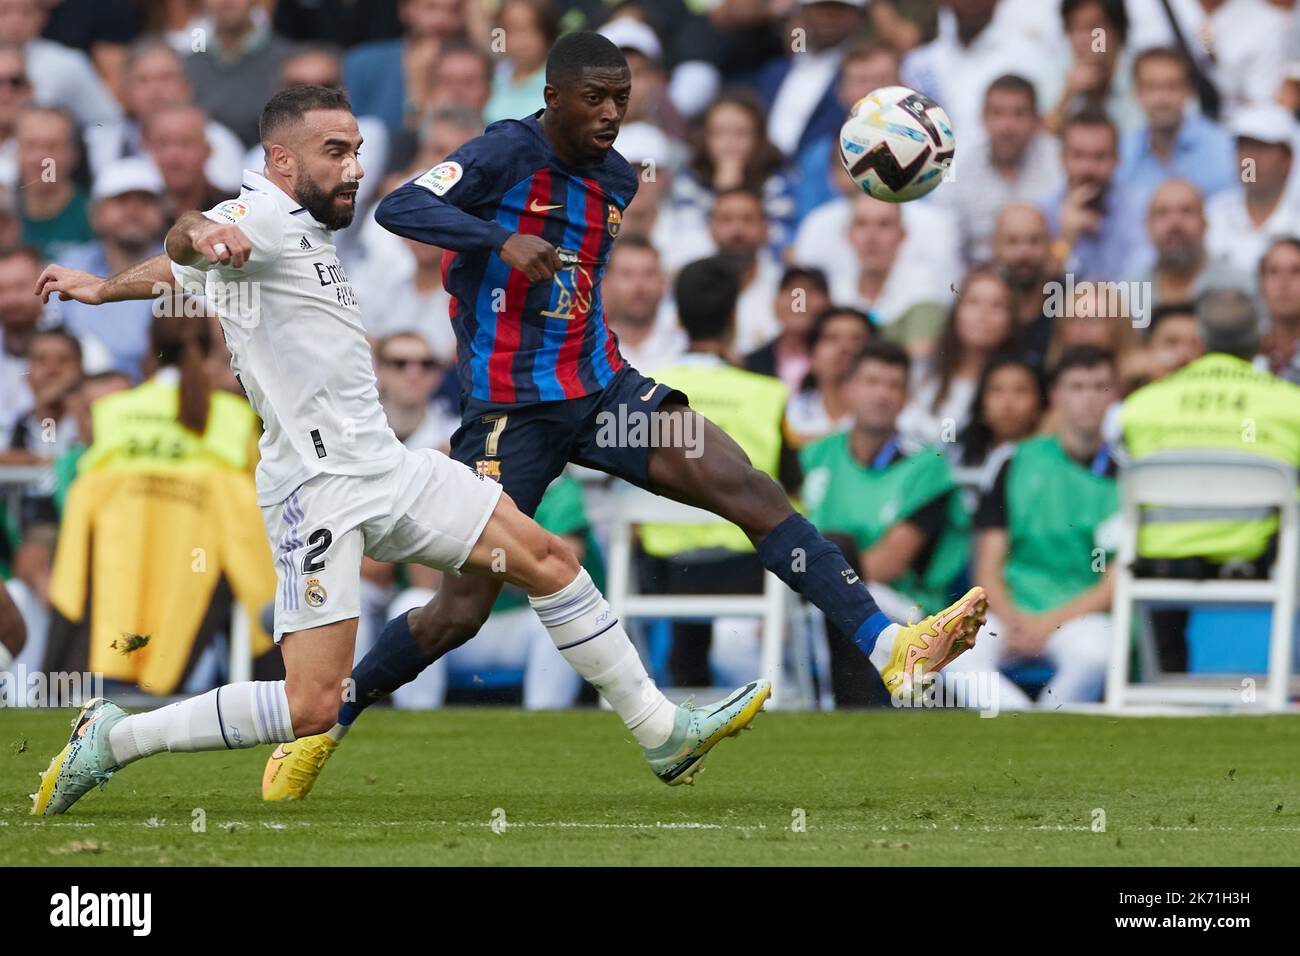 Madrid, Spain. 16th Oct, 2022. Daniel Carvajal (L) of Real Madrid vies with Ousmane Dembele of Barcelona during a La Liga football match between Real Madrid and FC Barcelona in Santiago Bernabeu Stadium, Madrid, Spain, Oct. 16, 2022. Credit: Meng Dingbo/Xinhua/Alamy Live News Stock Photo